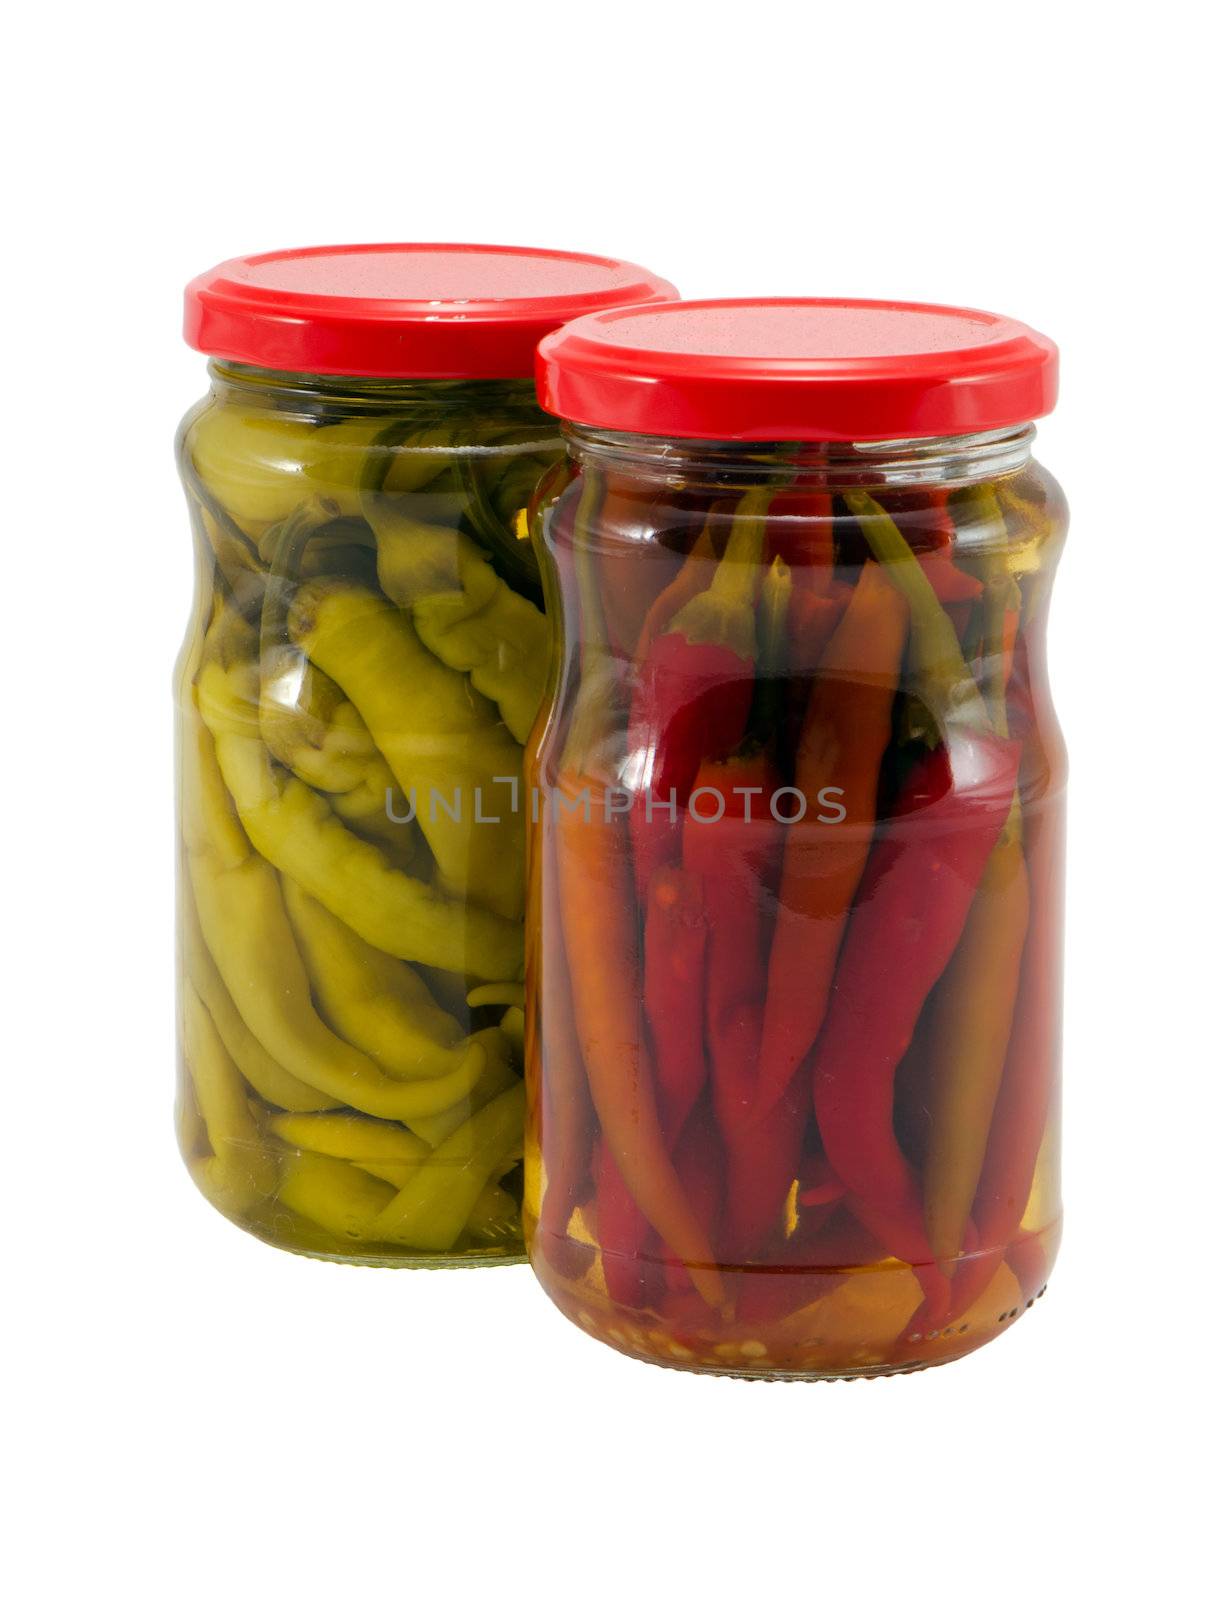 Ecologic chilli peppers paprika preserved in glass pots isolated on white background. Healthy natural food. Resource for winter time.